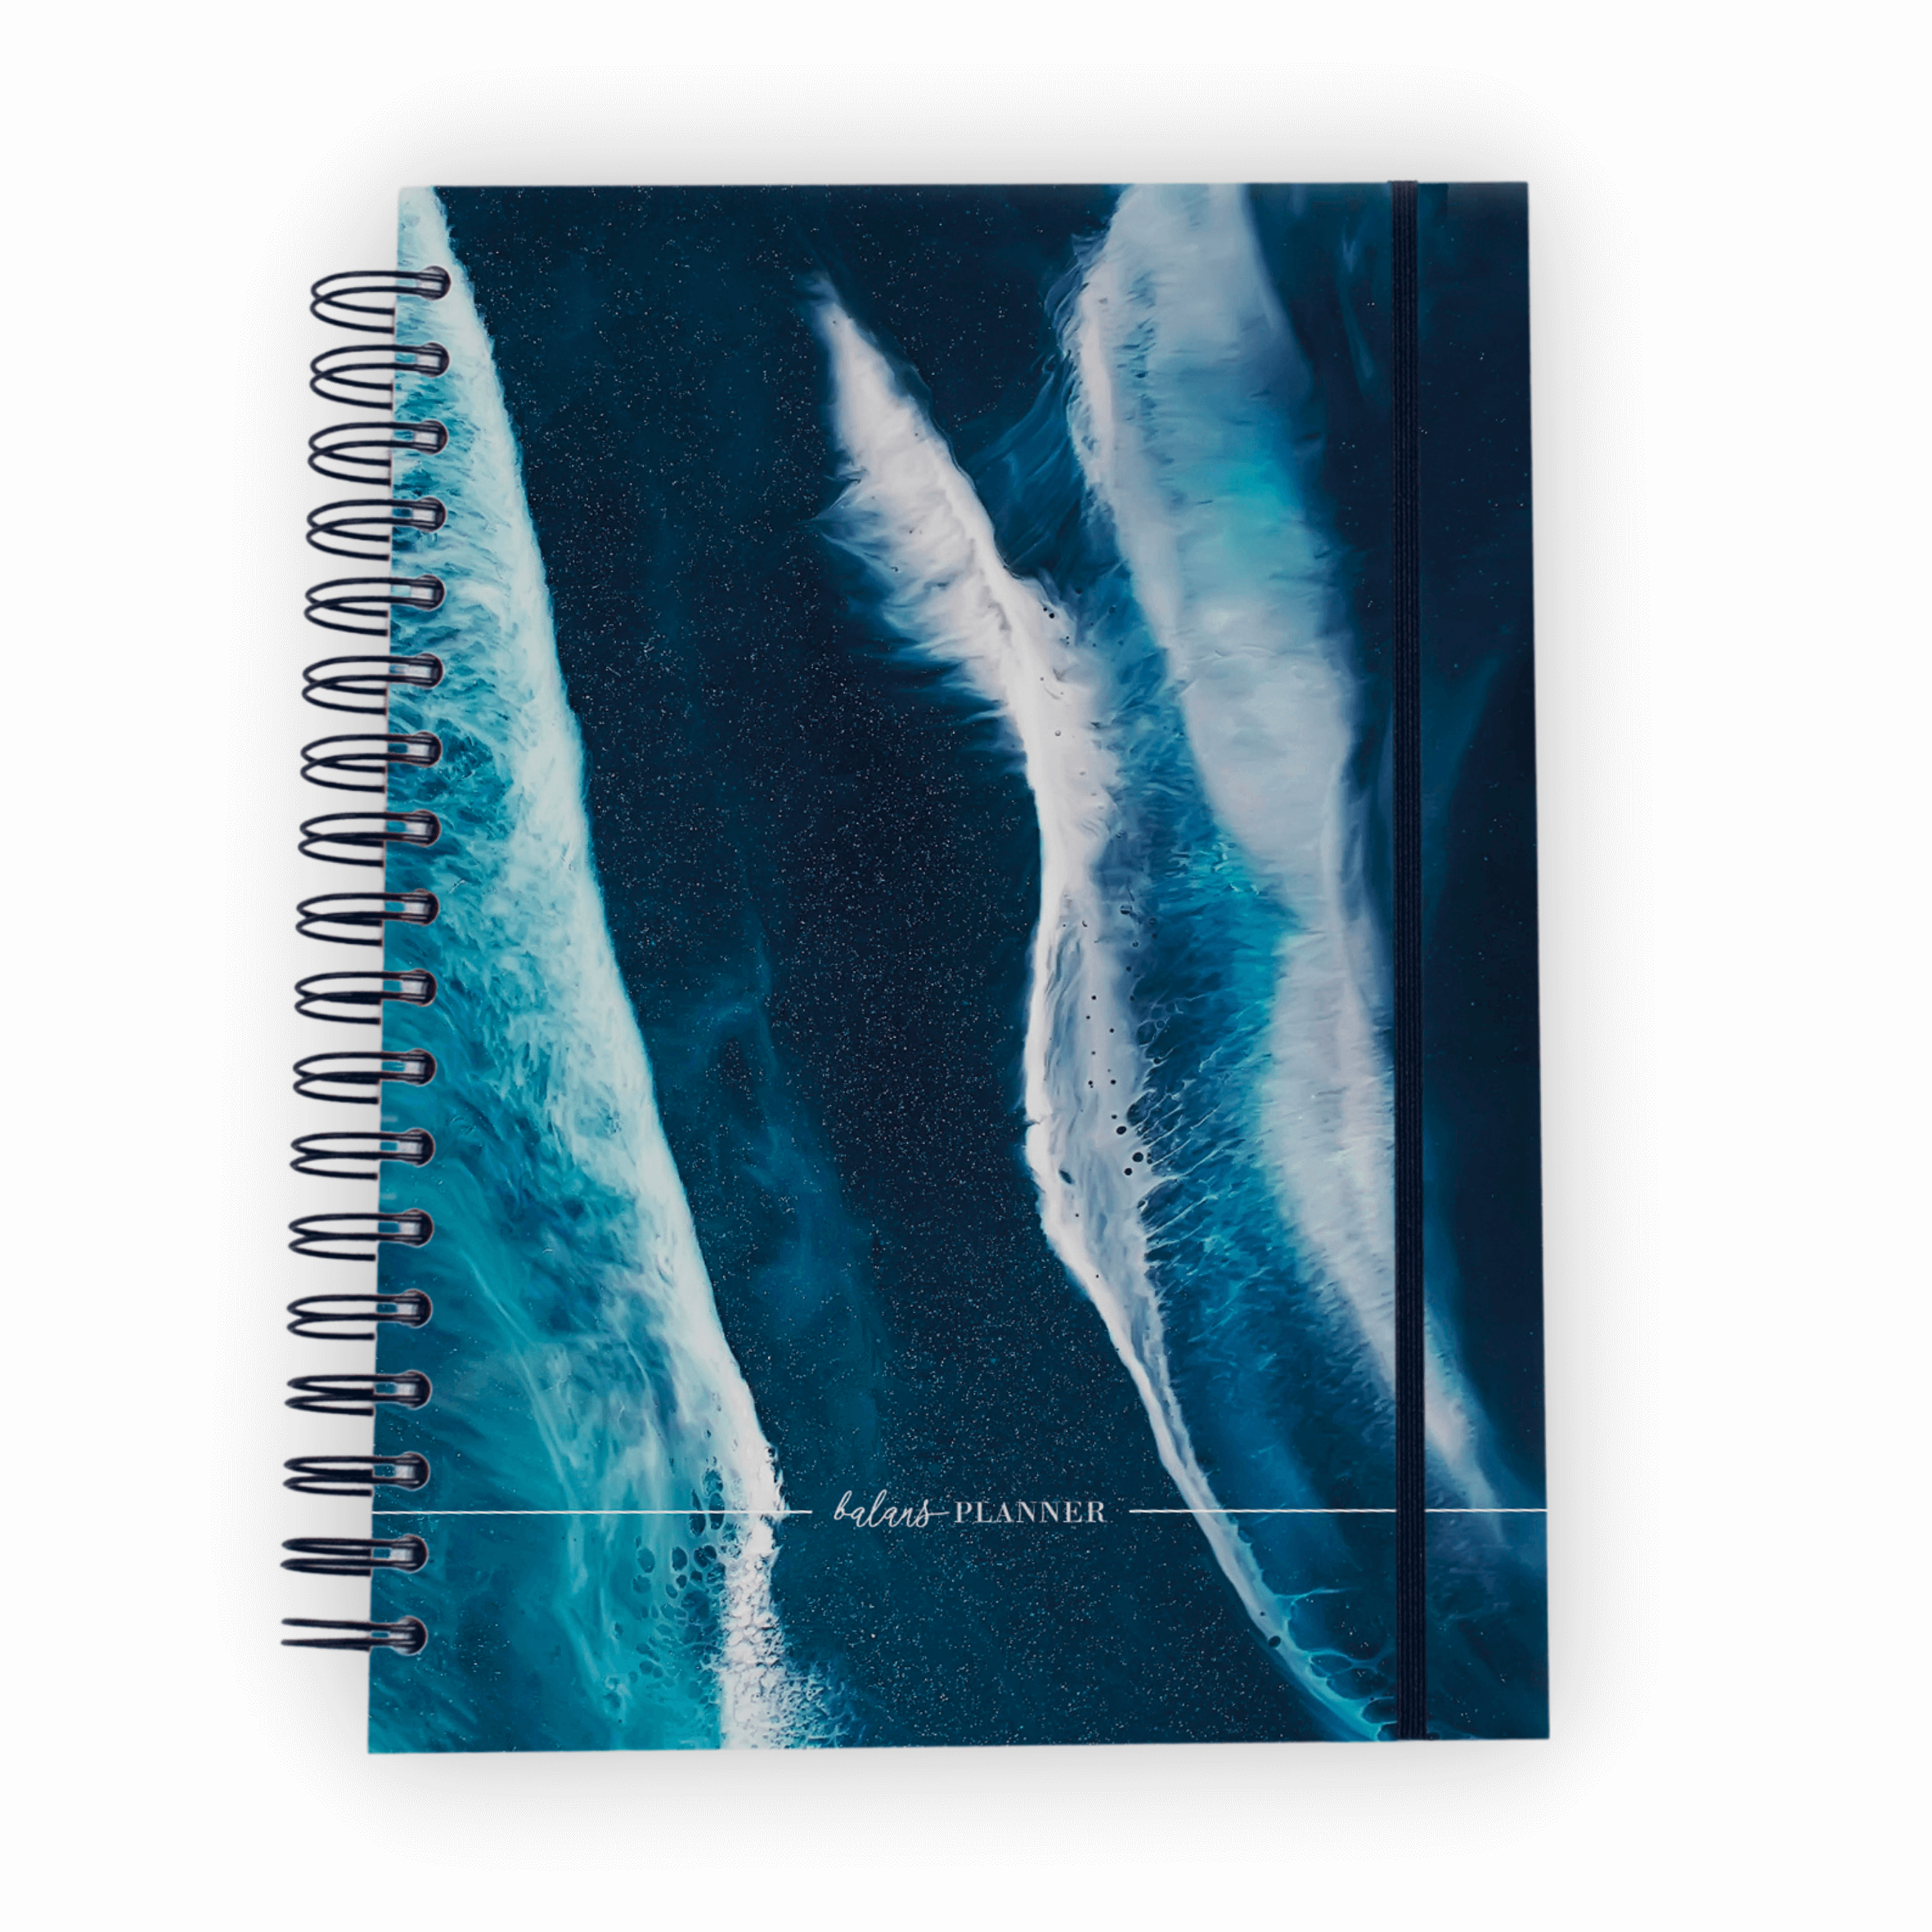 Balans Planner - See the sea